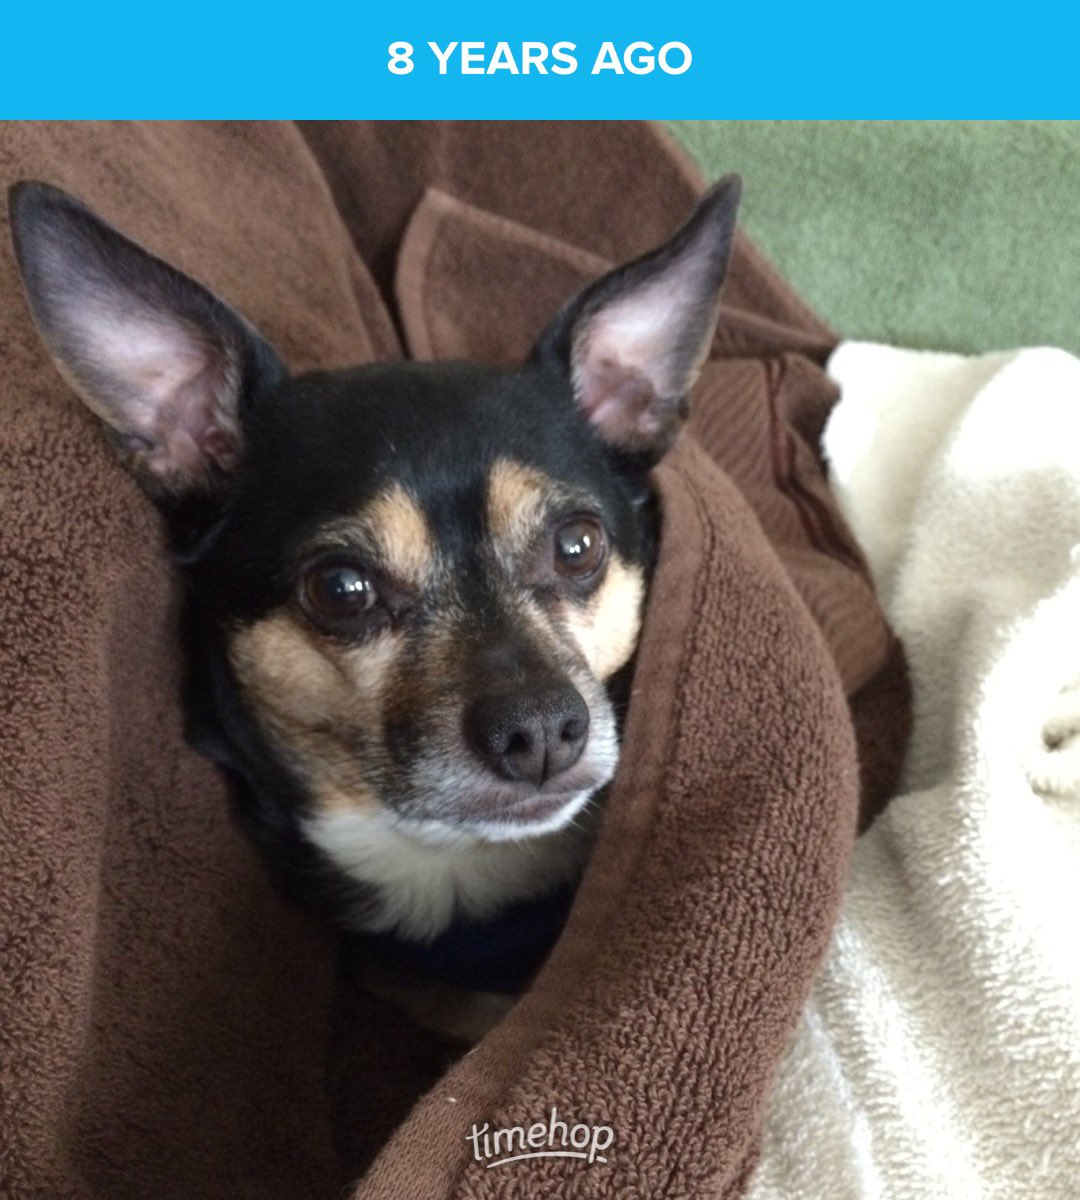 #TBT 8 years ago! Grandma was going to fold up some towels, but I might have got in the way!

#Buddy #Love #AdoptDontShop #dogsoftwitter #RatTerrierChihuahua #RatTerrier #Chihuahua #Dogs #dogsarelove #dogsarelife #DogsAreFamily #treats #rides #RainbowBridge #RIP #SpiritOfBuddy 🌈